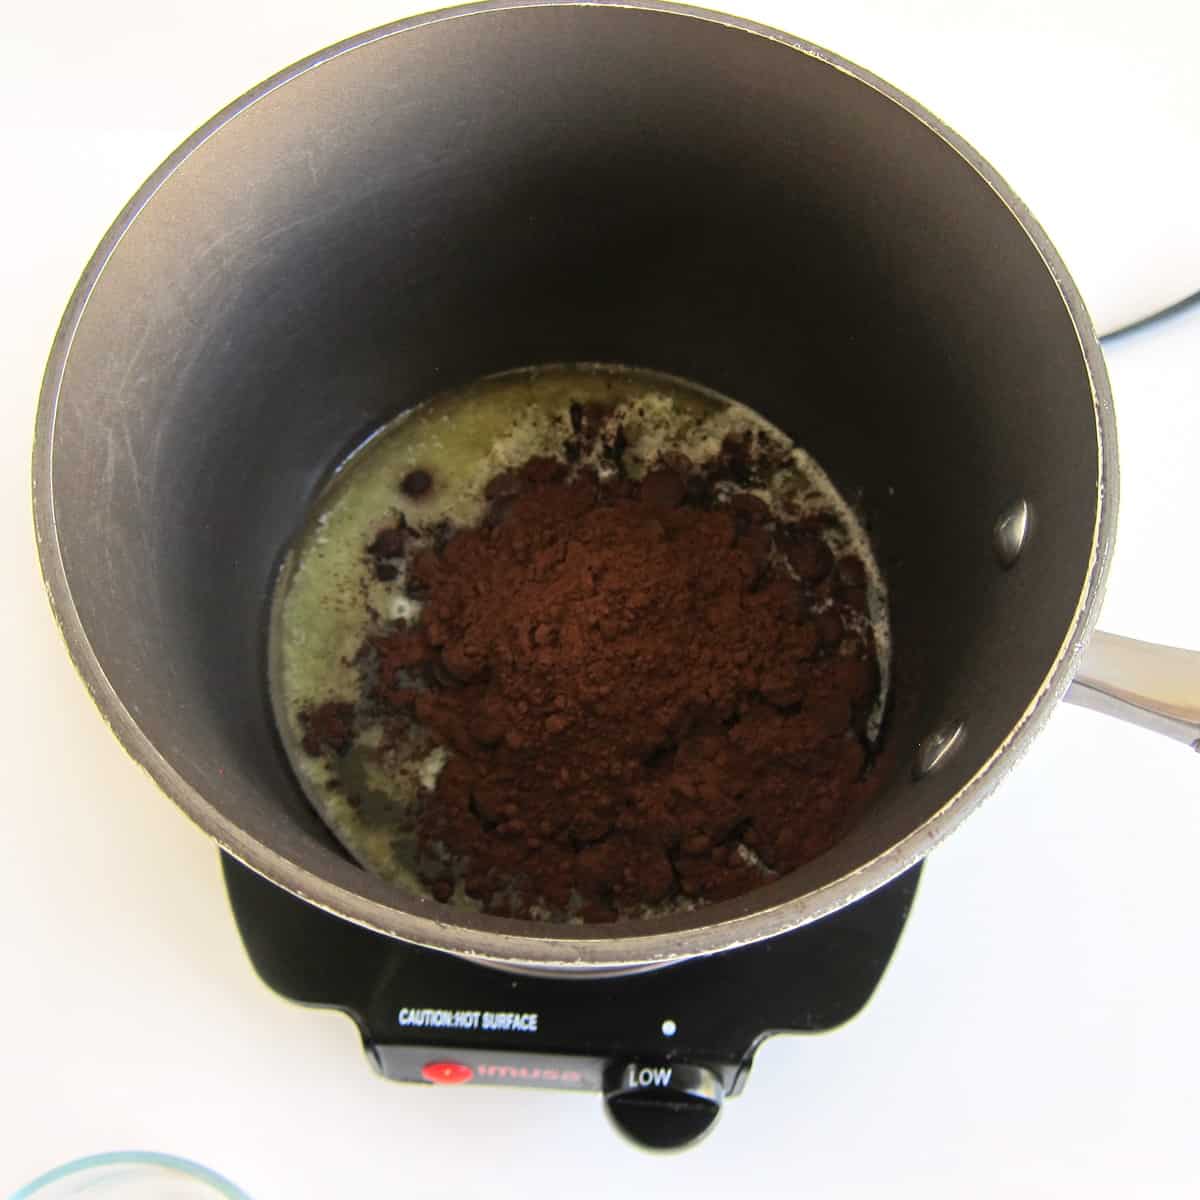 butter, chocolate chips, and cocoa powder melting in a saucepan over low heat